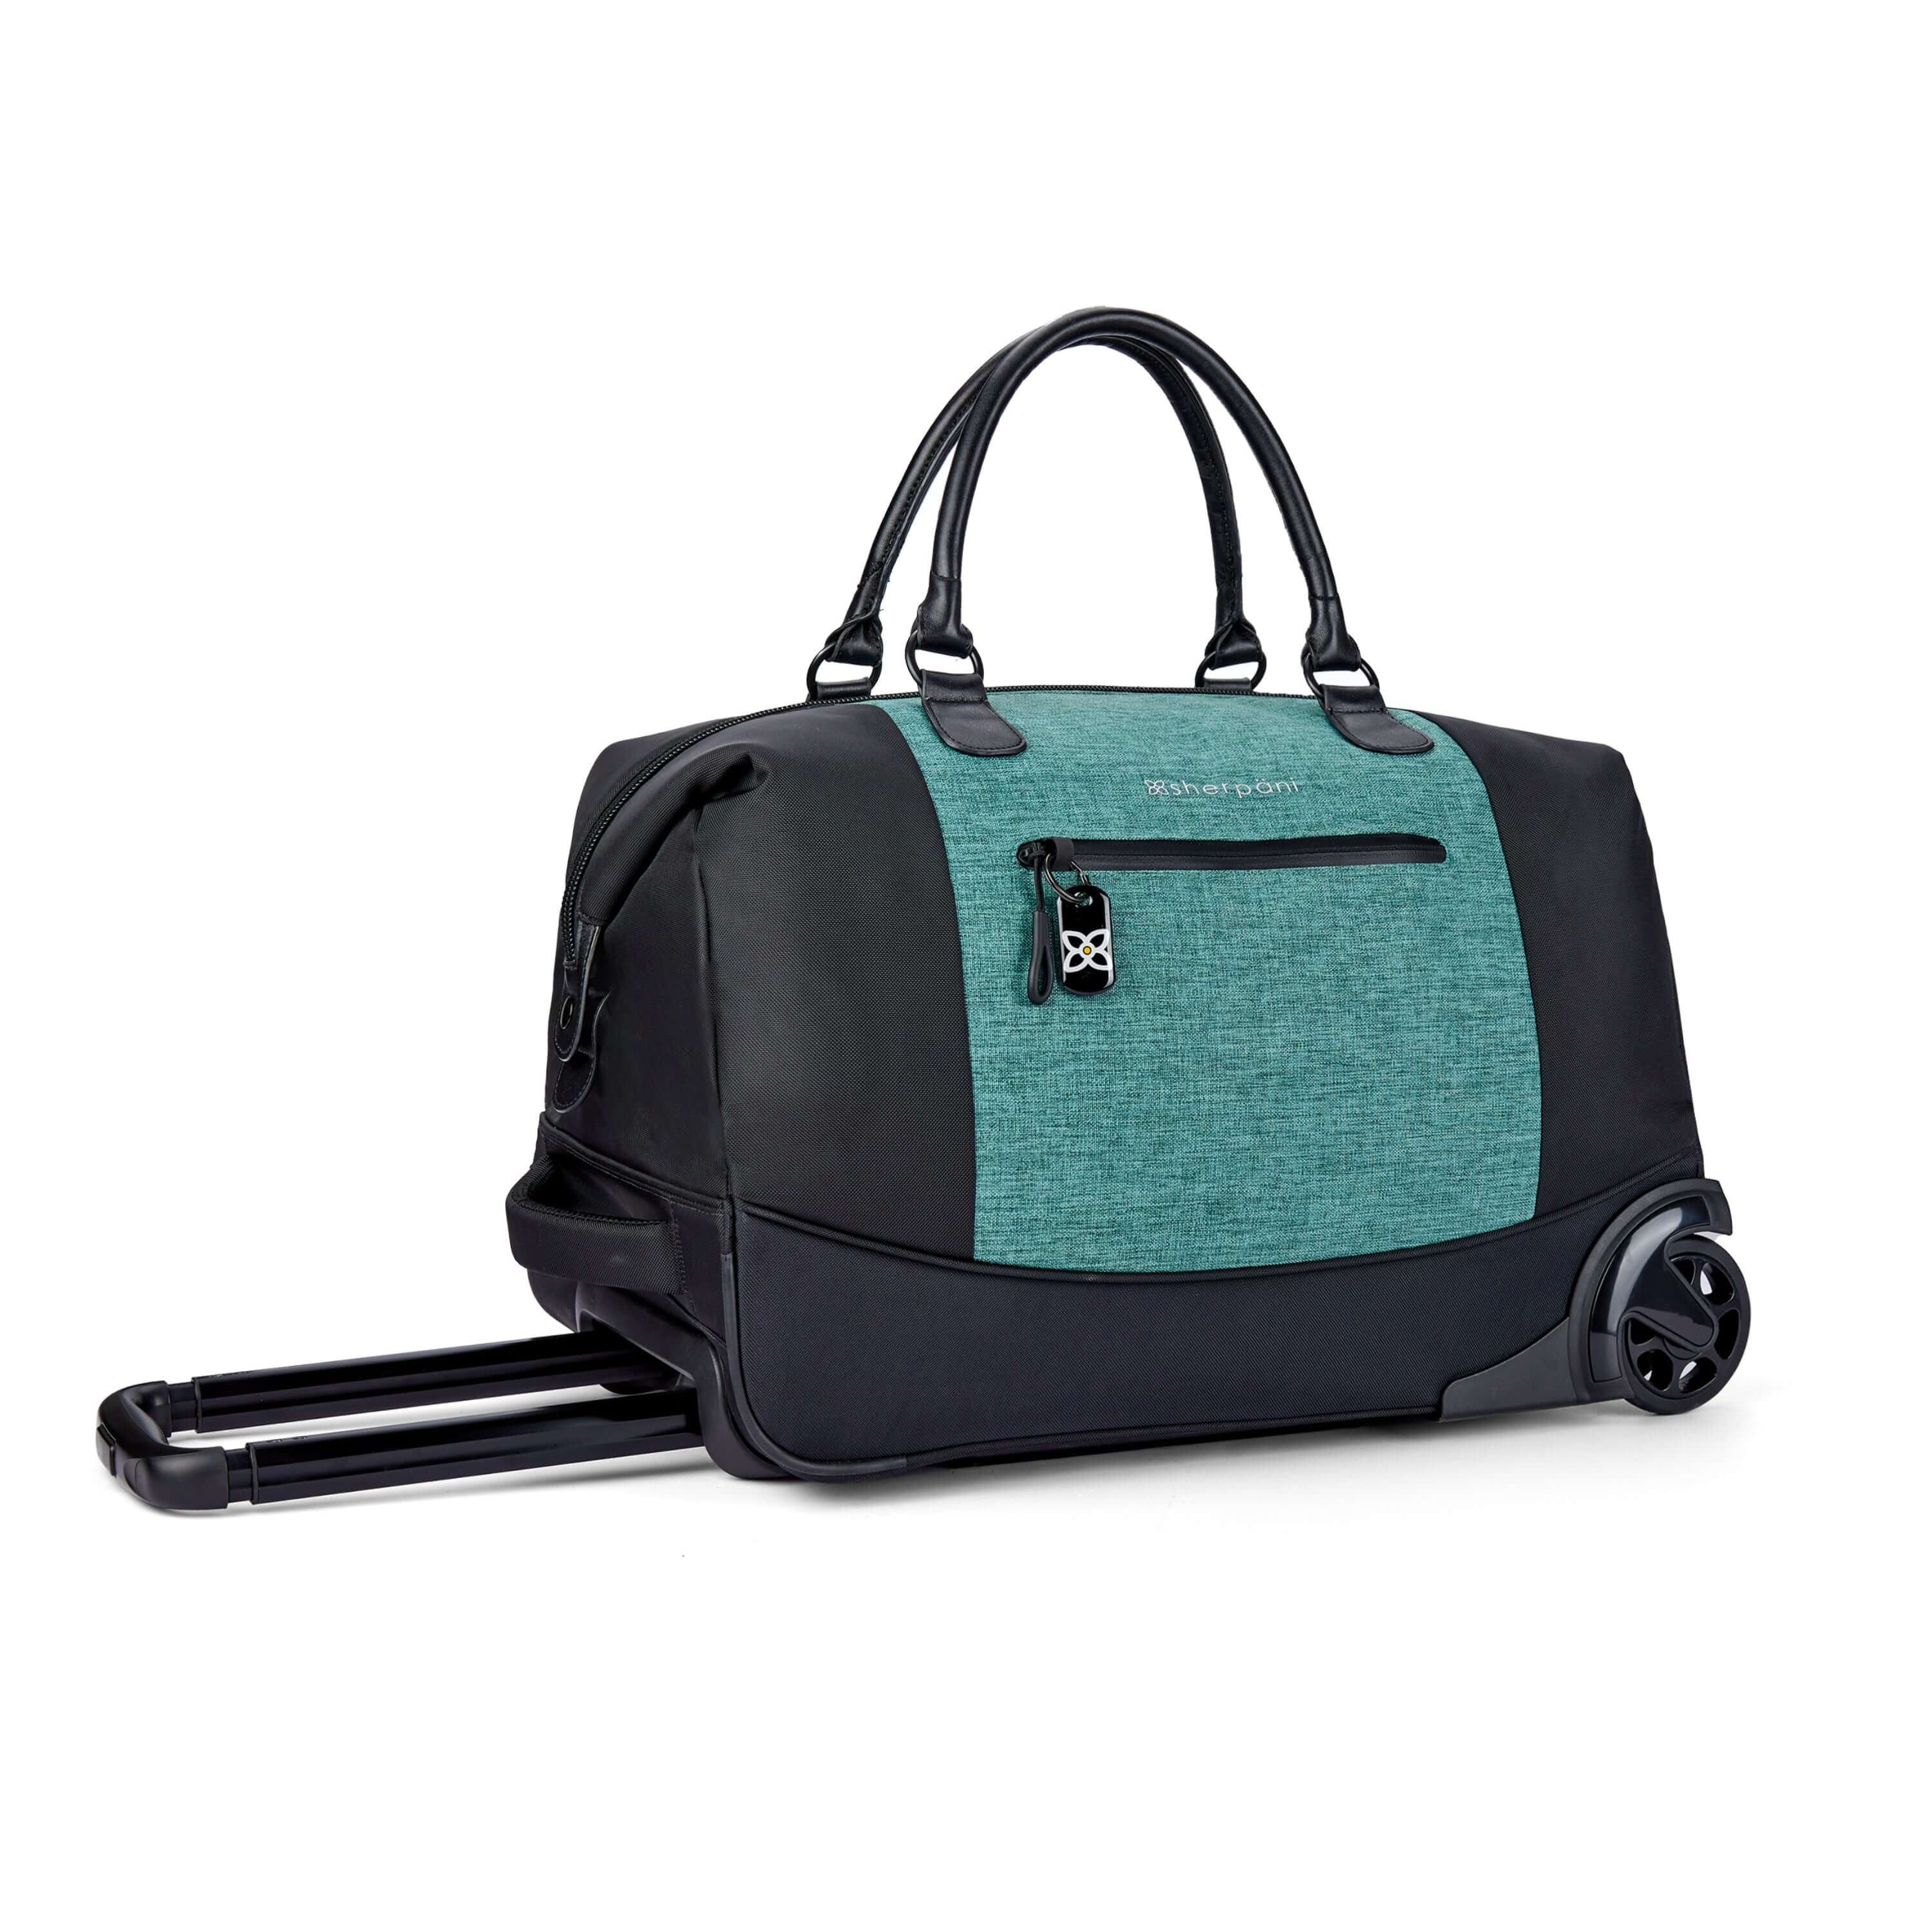 Angled front view of Sherpani’s Anti Theft rolling Duffle, the Trip in Teal, with vegan leather accents in black. The bag lies flat on the ground with the luggage handle extended on the left side and the rolling wheels shown on the right side. The bag features short tote handles at the top and an external zipper compartment on the front panel with locking zipper and ReturnMe tag. #color_teal